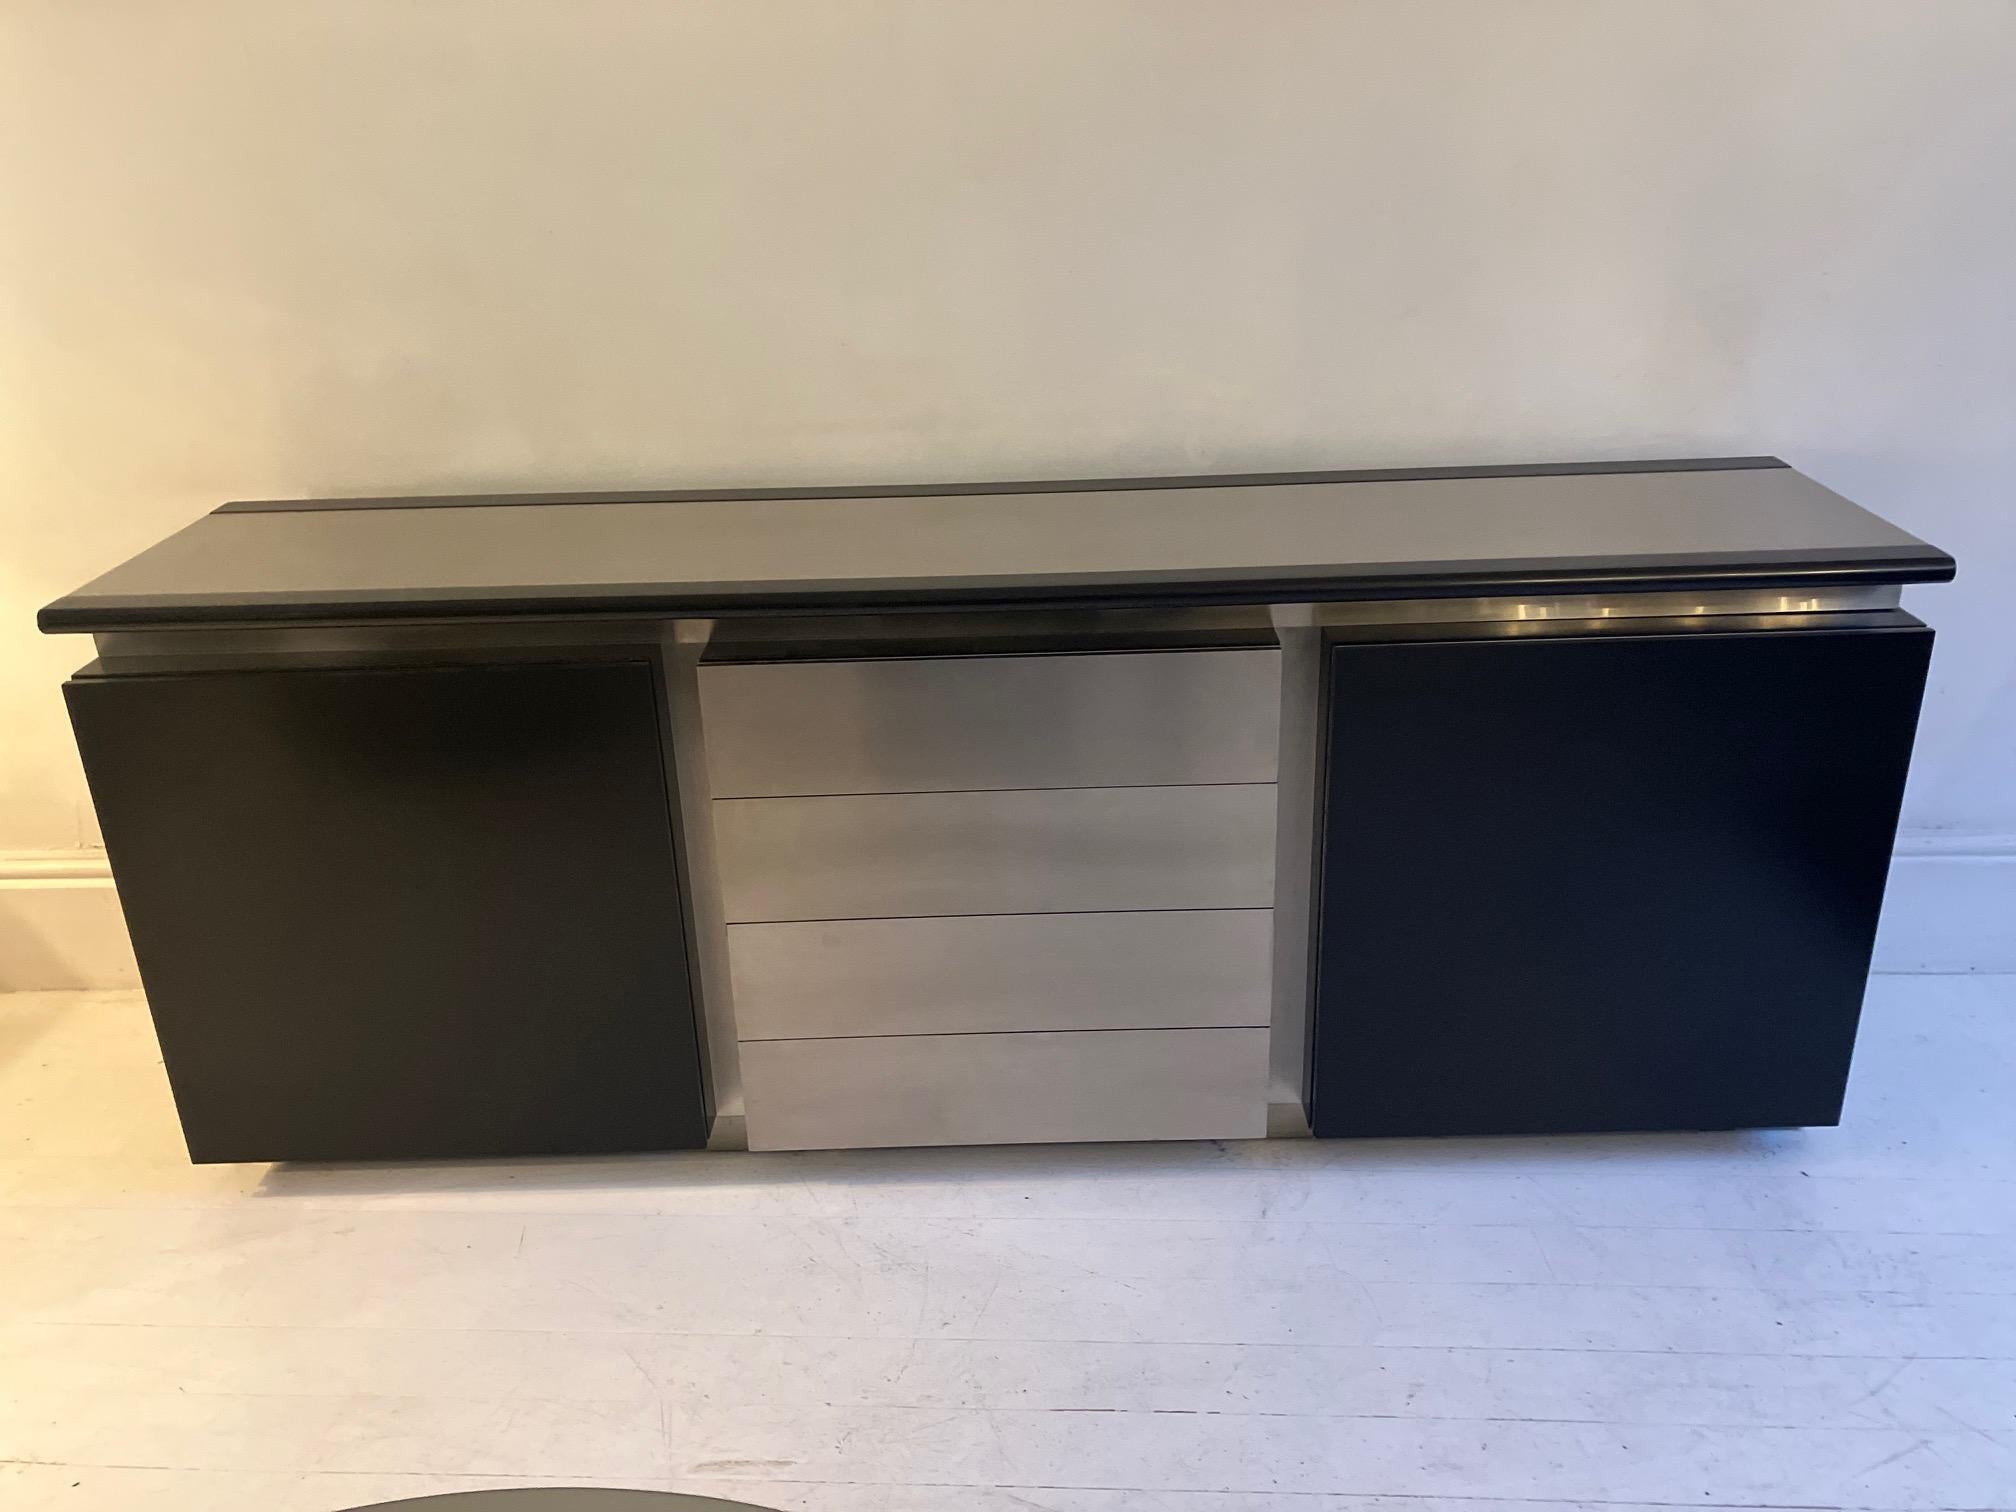 Black lacquer and brushed steel Parioli side cabinet by Giotto Stoppino and Marco Acerbis for Acerbis.
 
Italian circa 1970s - great proportions and quality. Excellent original condition.
 
Giotto Stoppino and Marco Acerbis are two talented